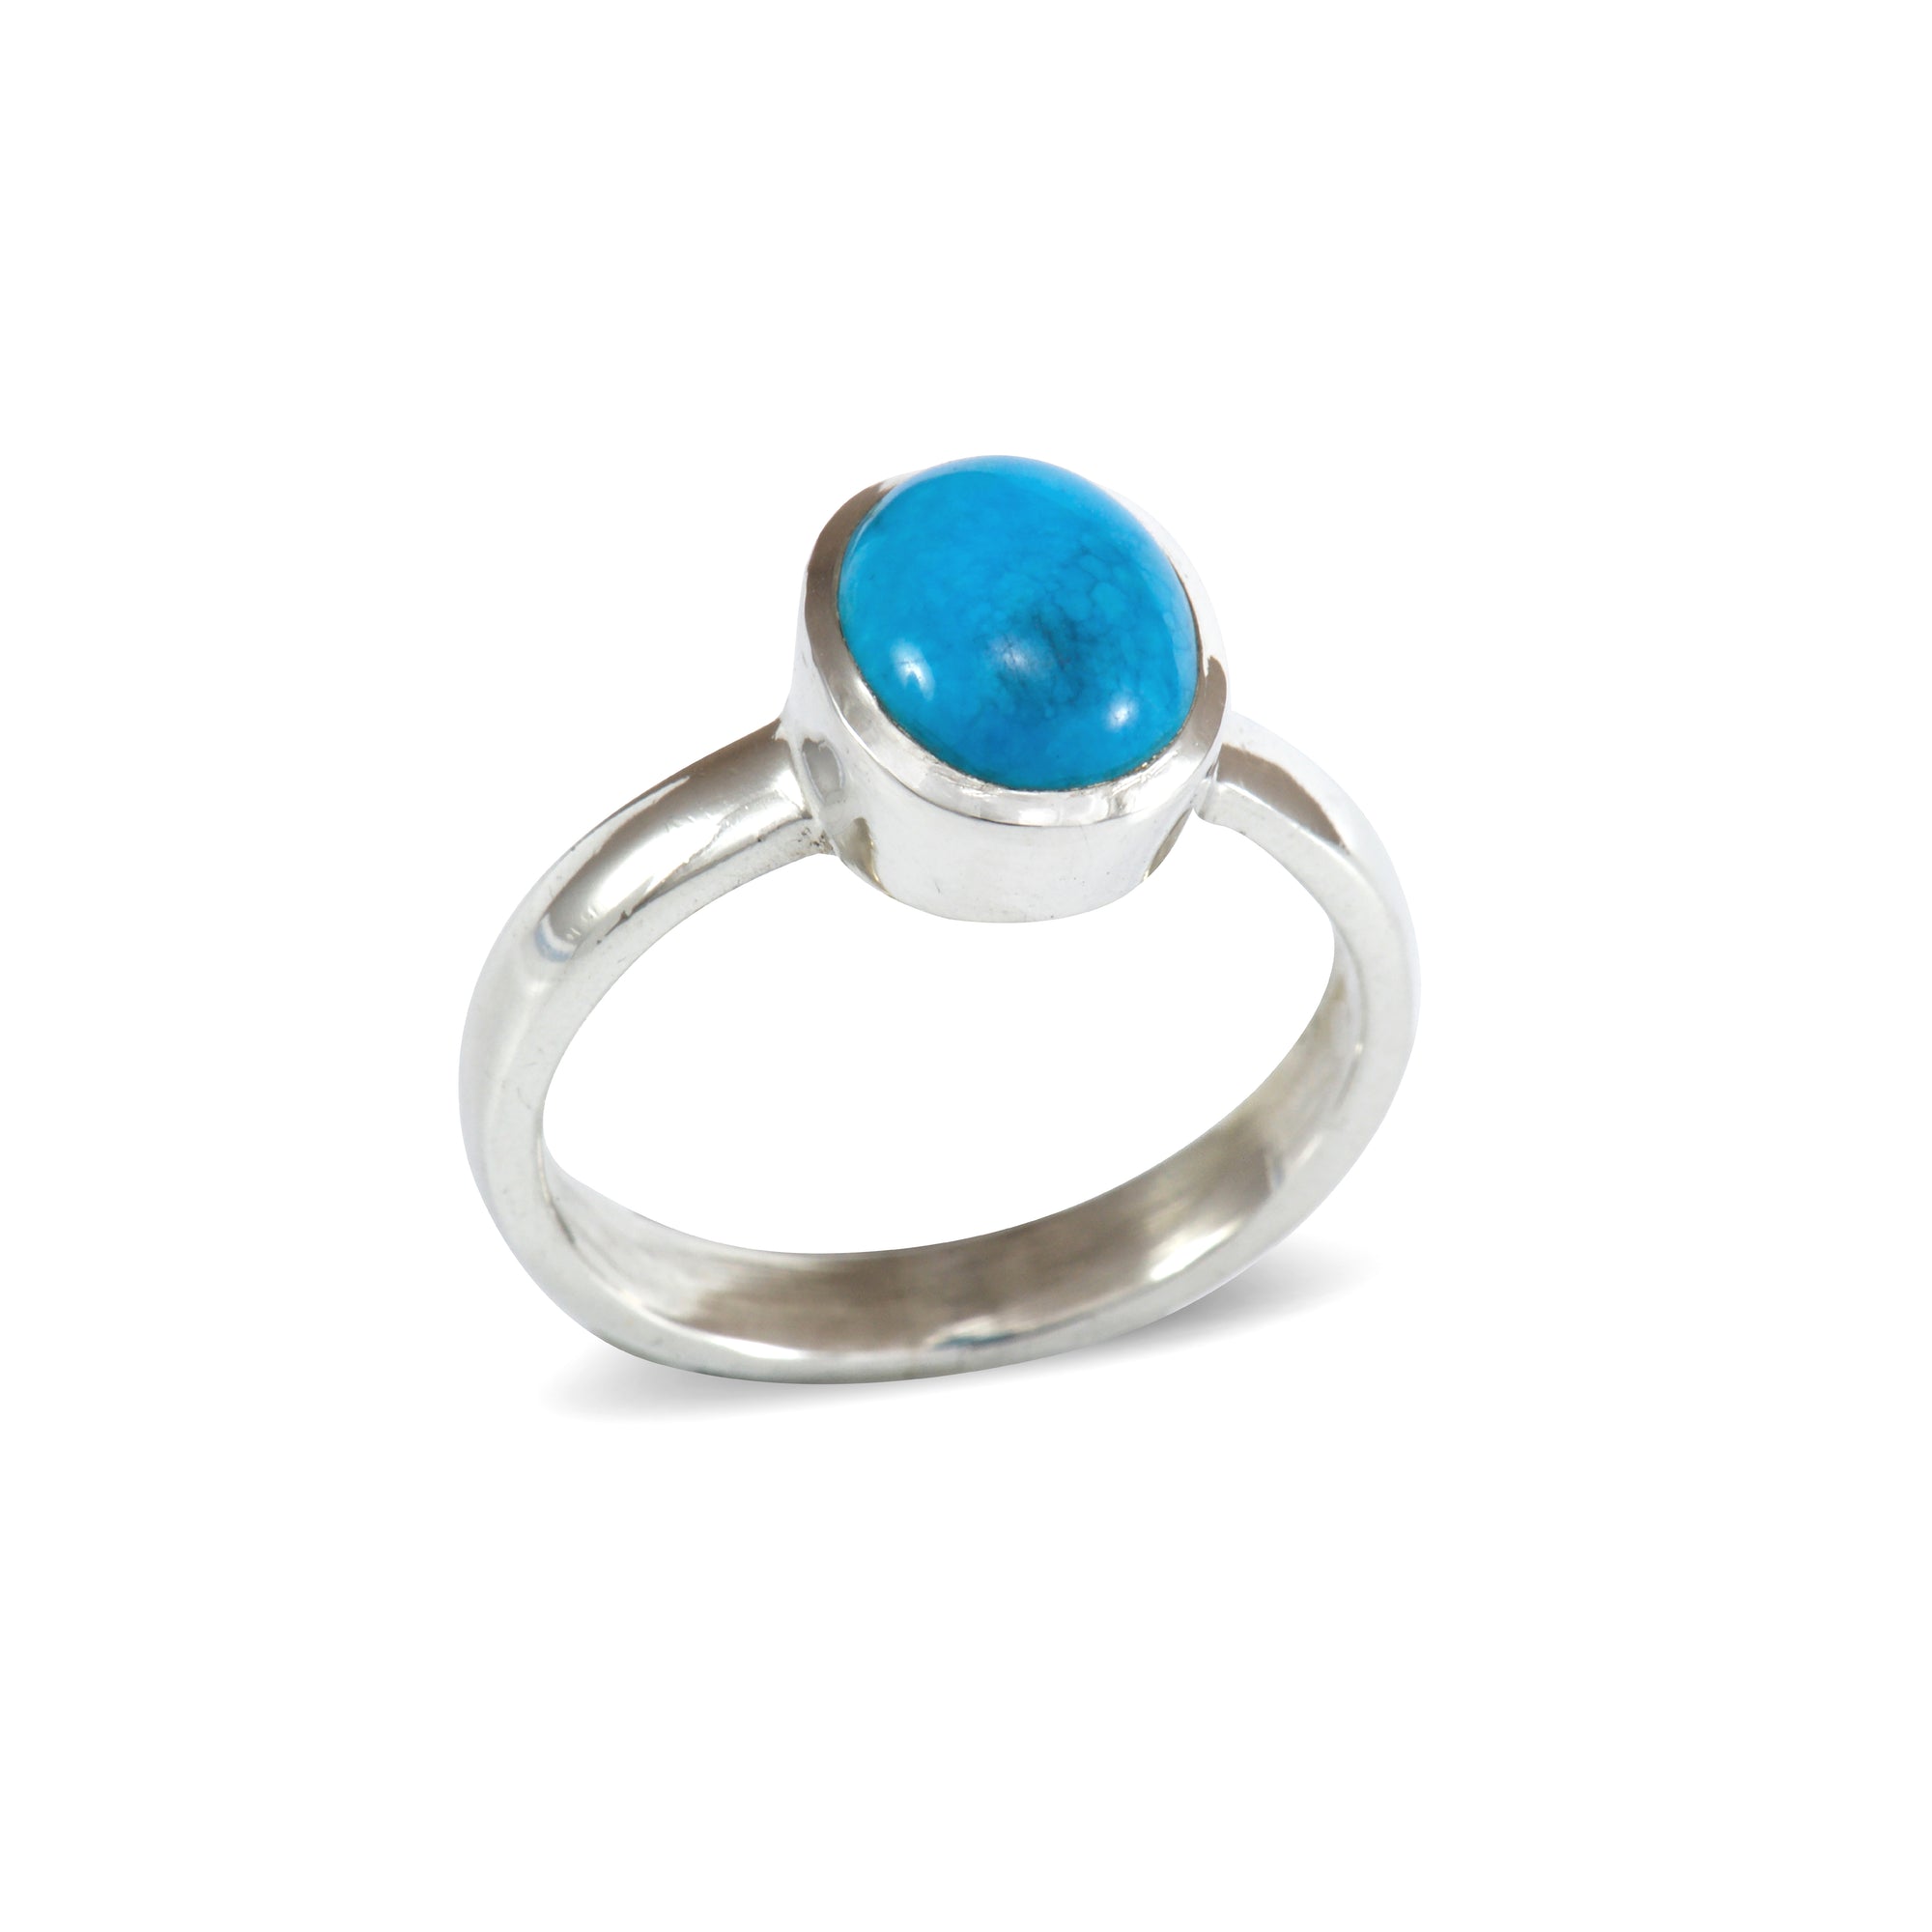 Small Turquoise ring